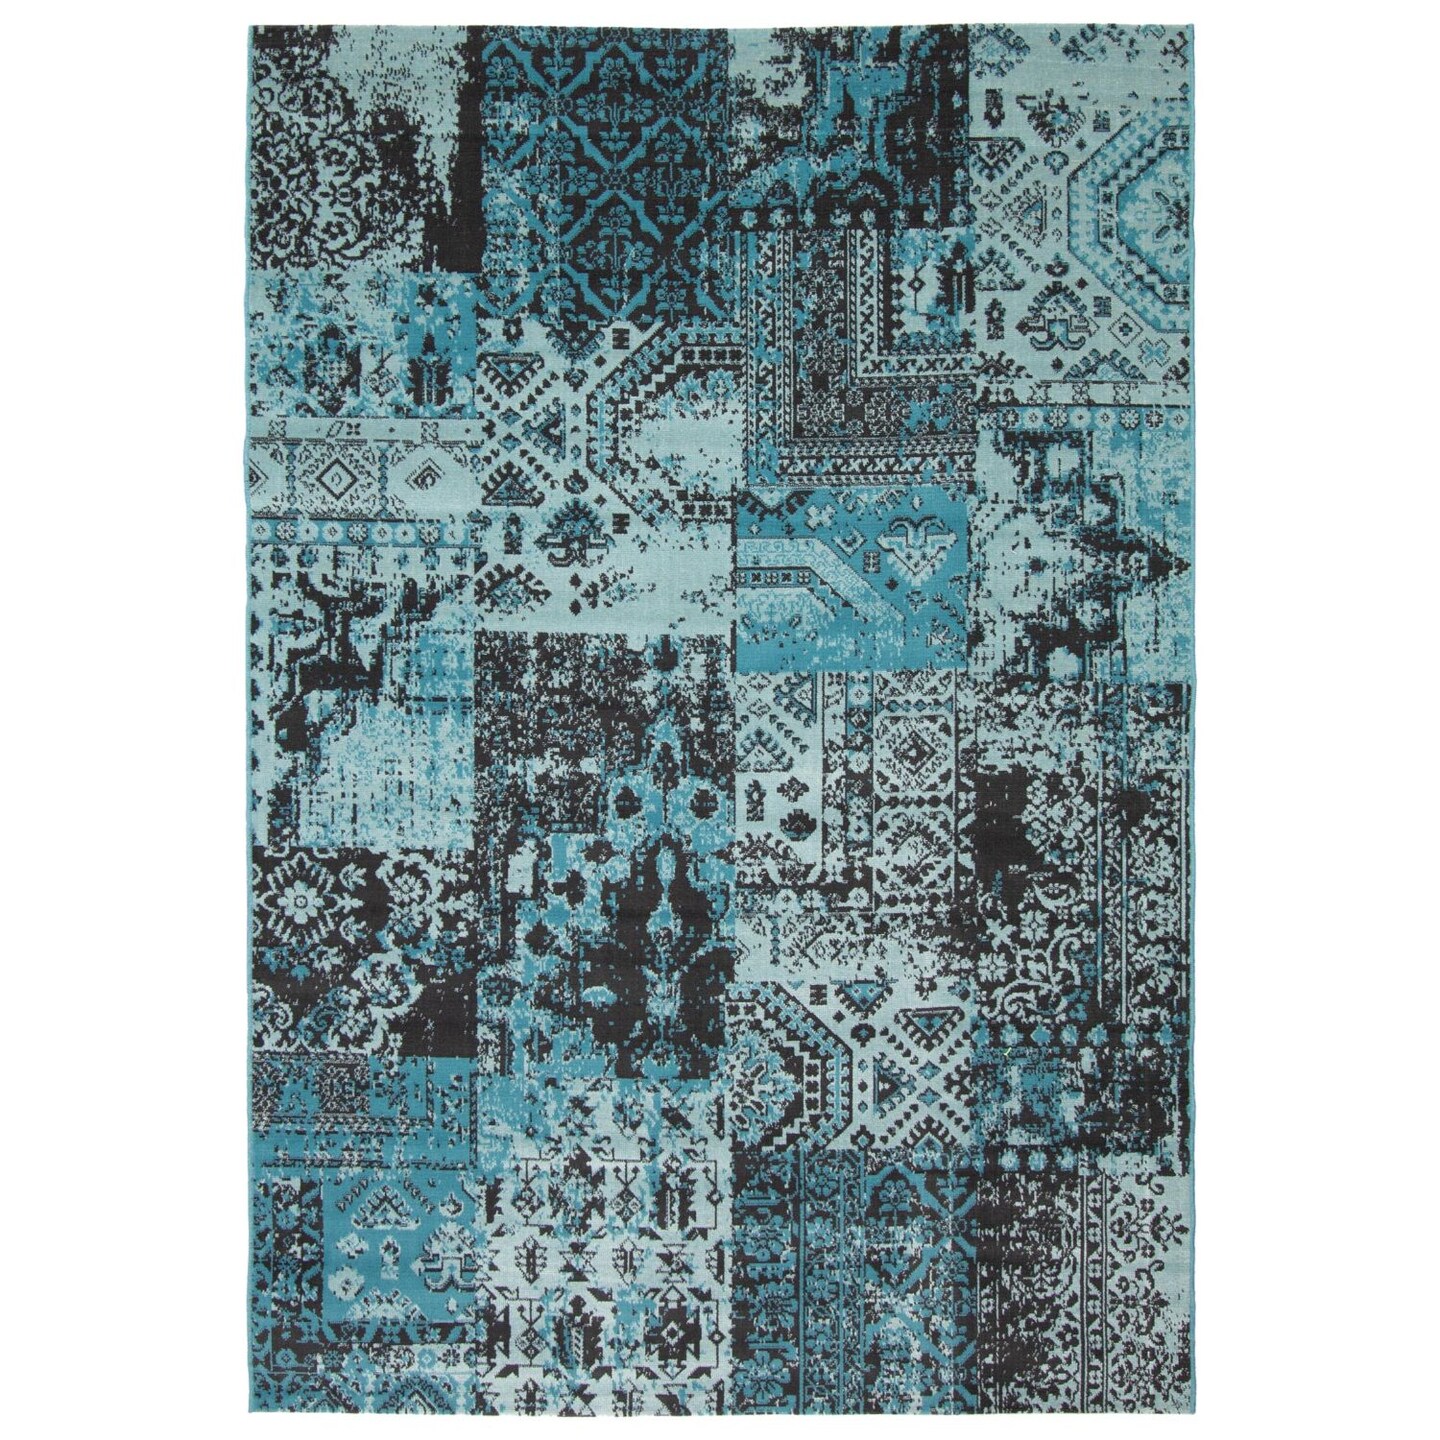 Chaudhary Living 4&#x27; x 5.5&#x27; Blue and Black Distressed Patchwork Rectangular Area Throw Rug